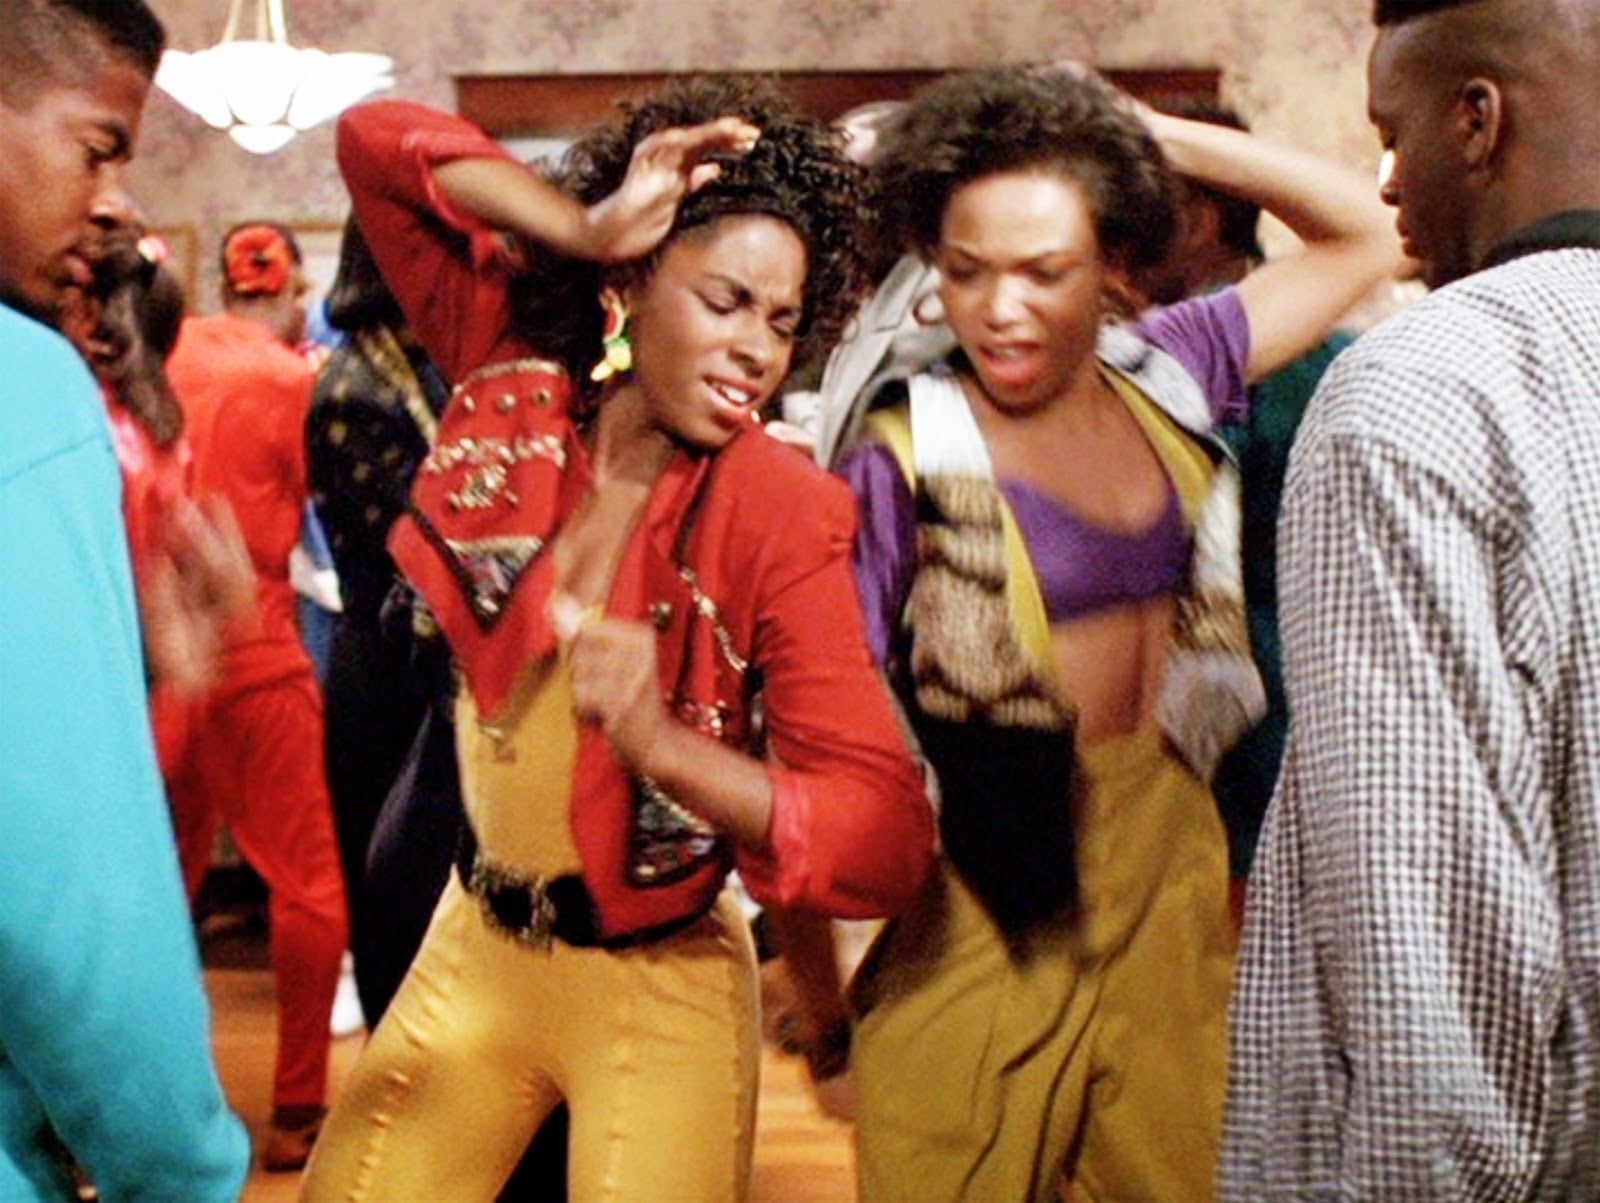 AJ Johnson and Tisha Campbell Recreating Their Iconic 'House Party' Dance Scene Is An Epic Flashback Moment
